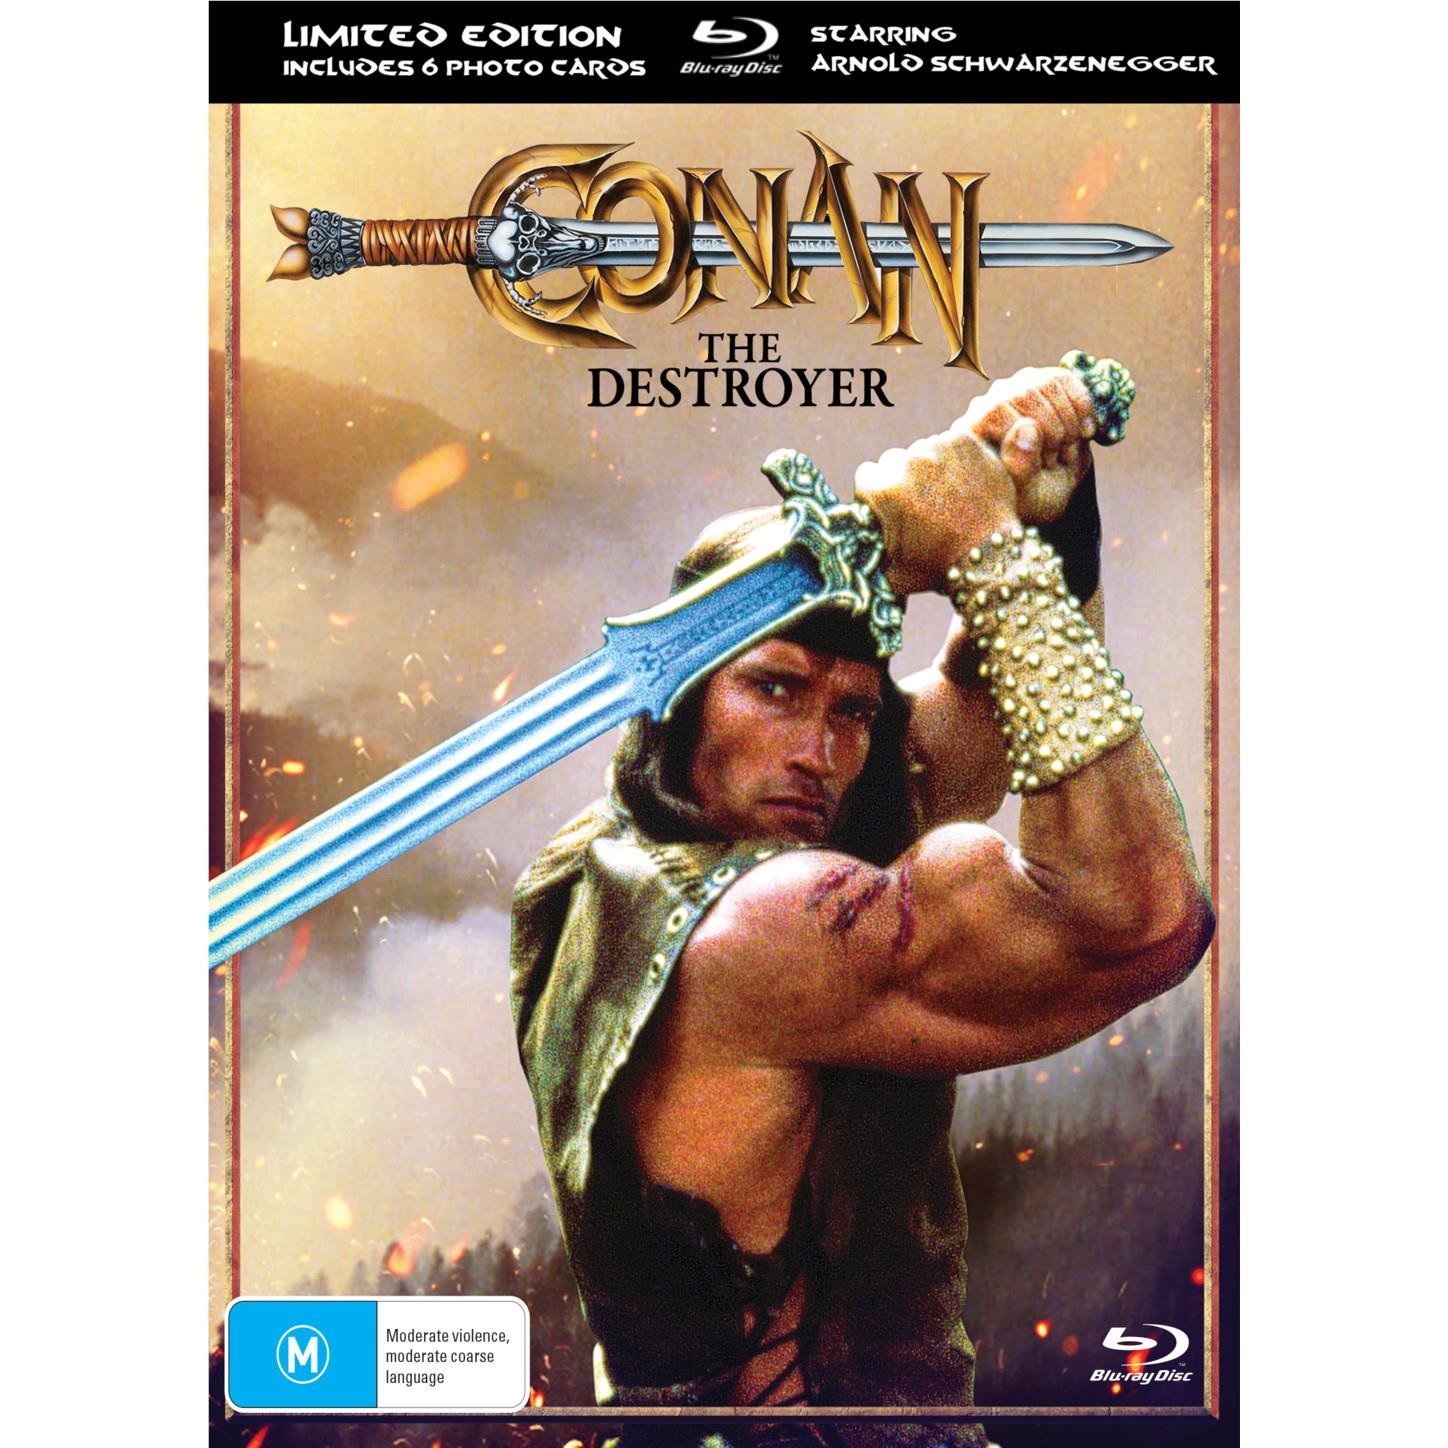 conan the destroyer - limited edition